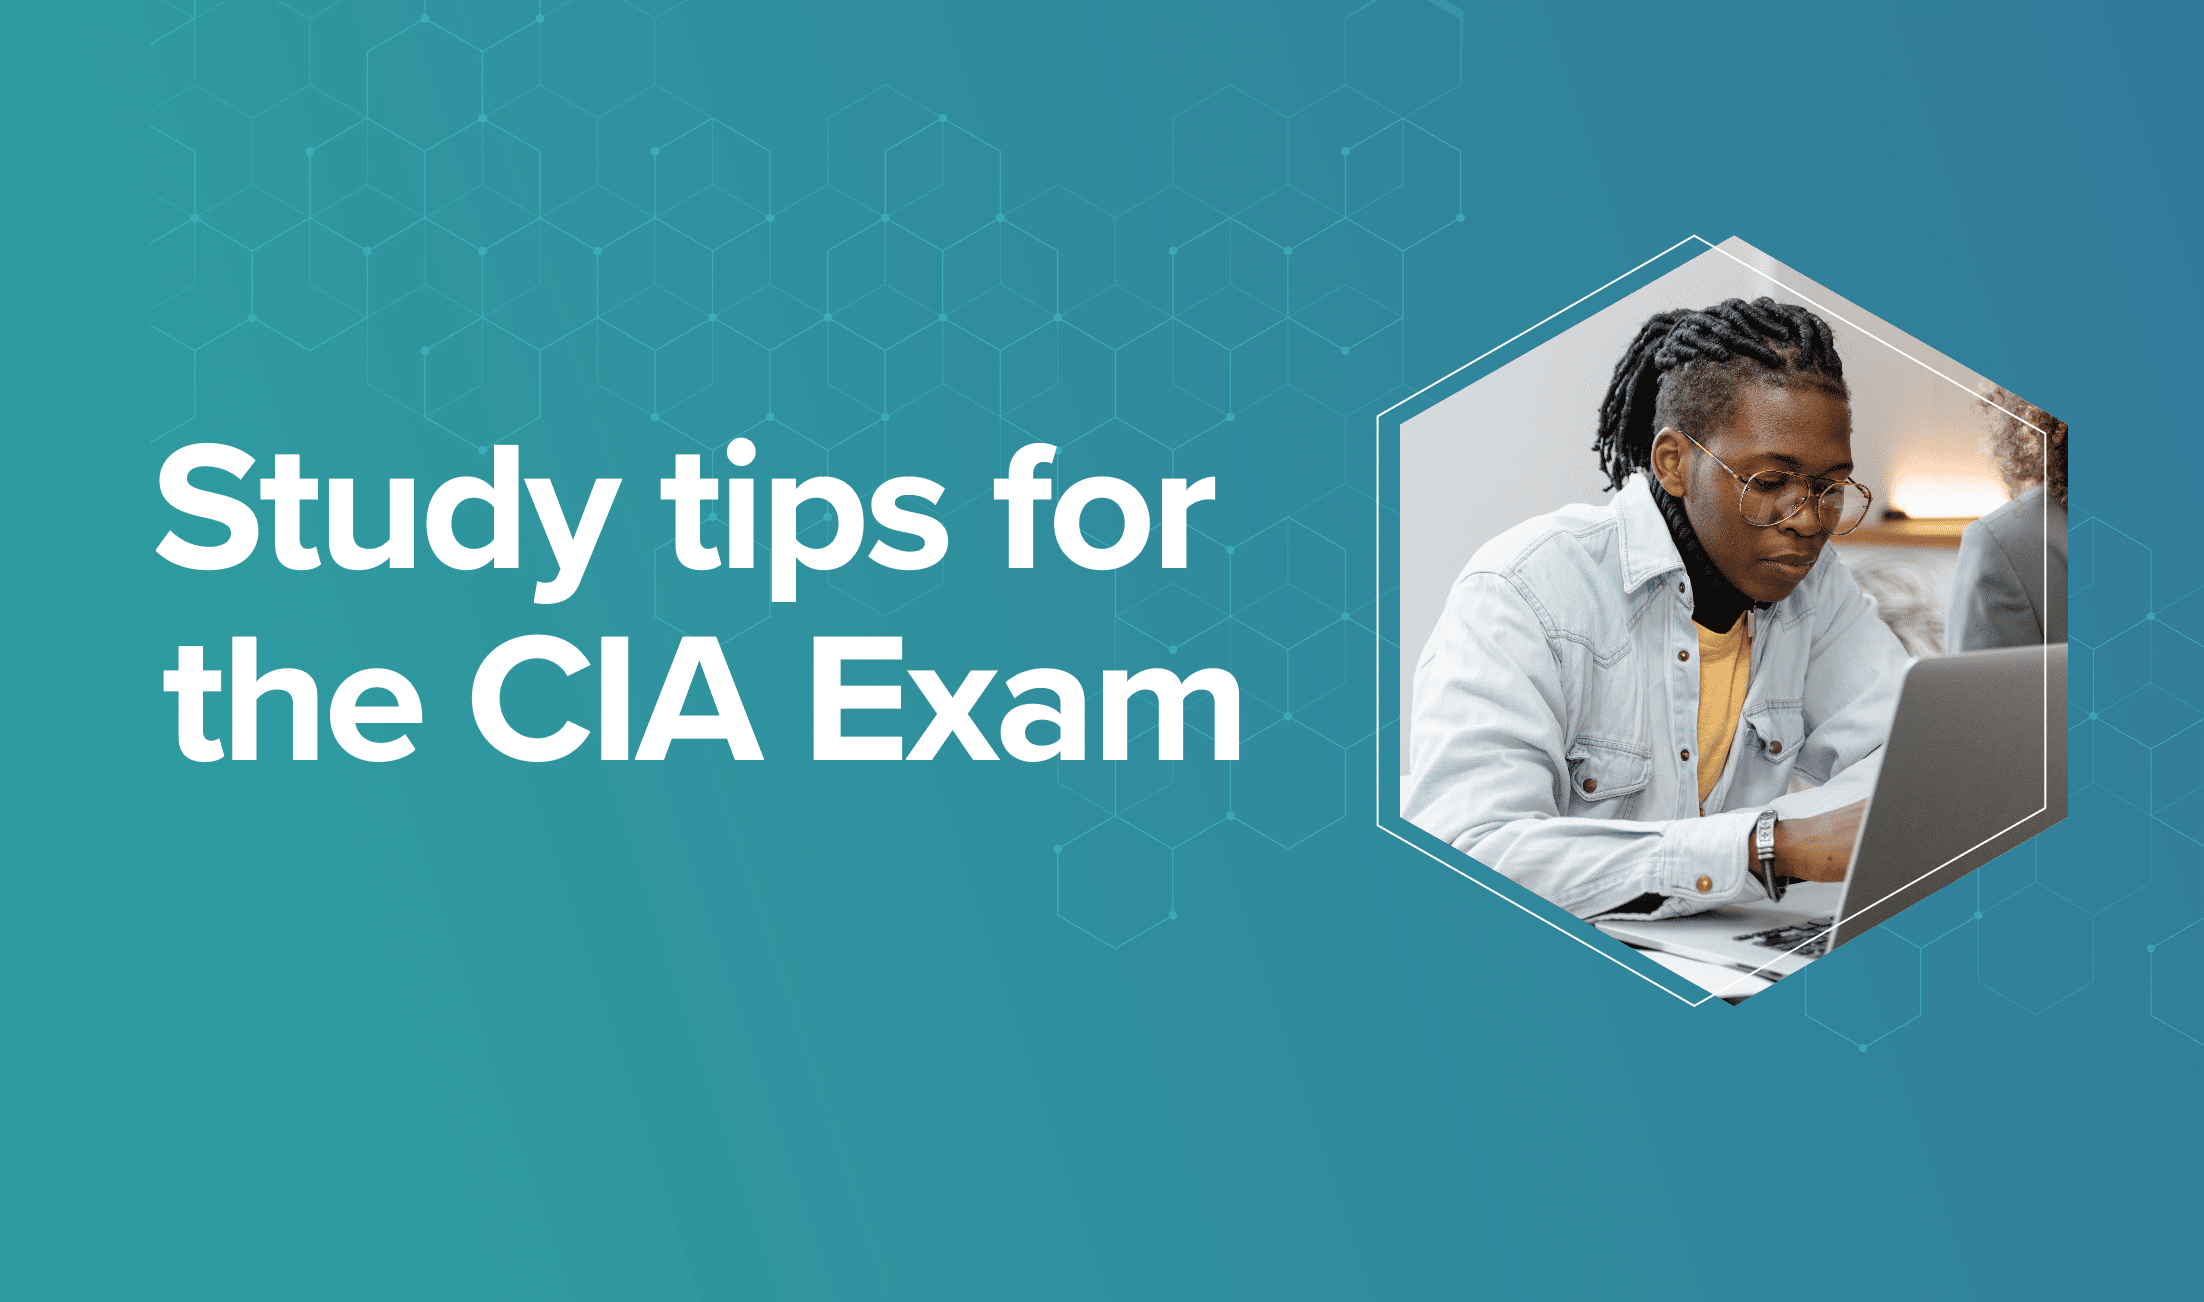 7 study tips for the CIA Exam 